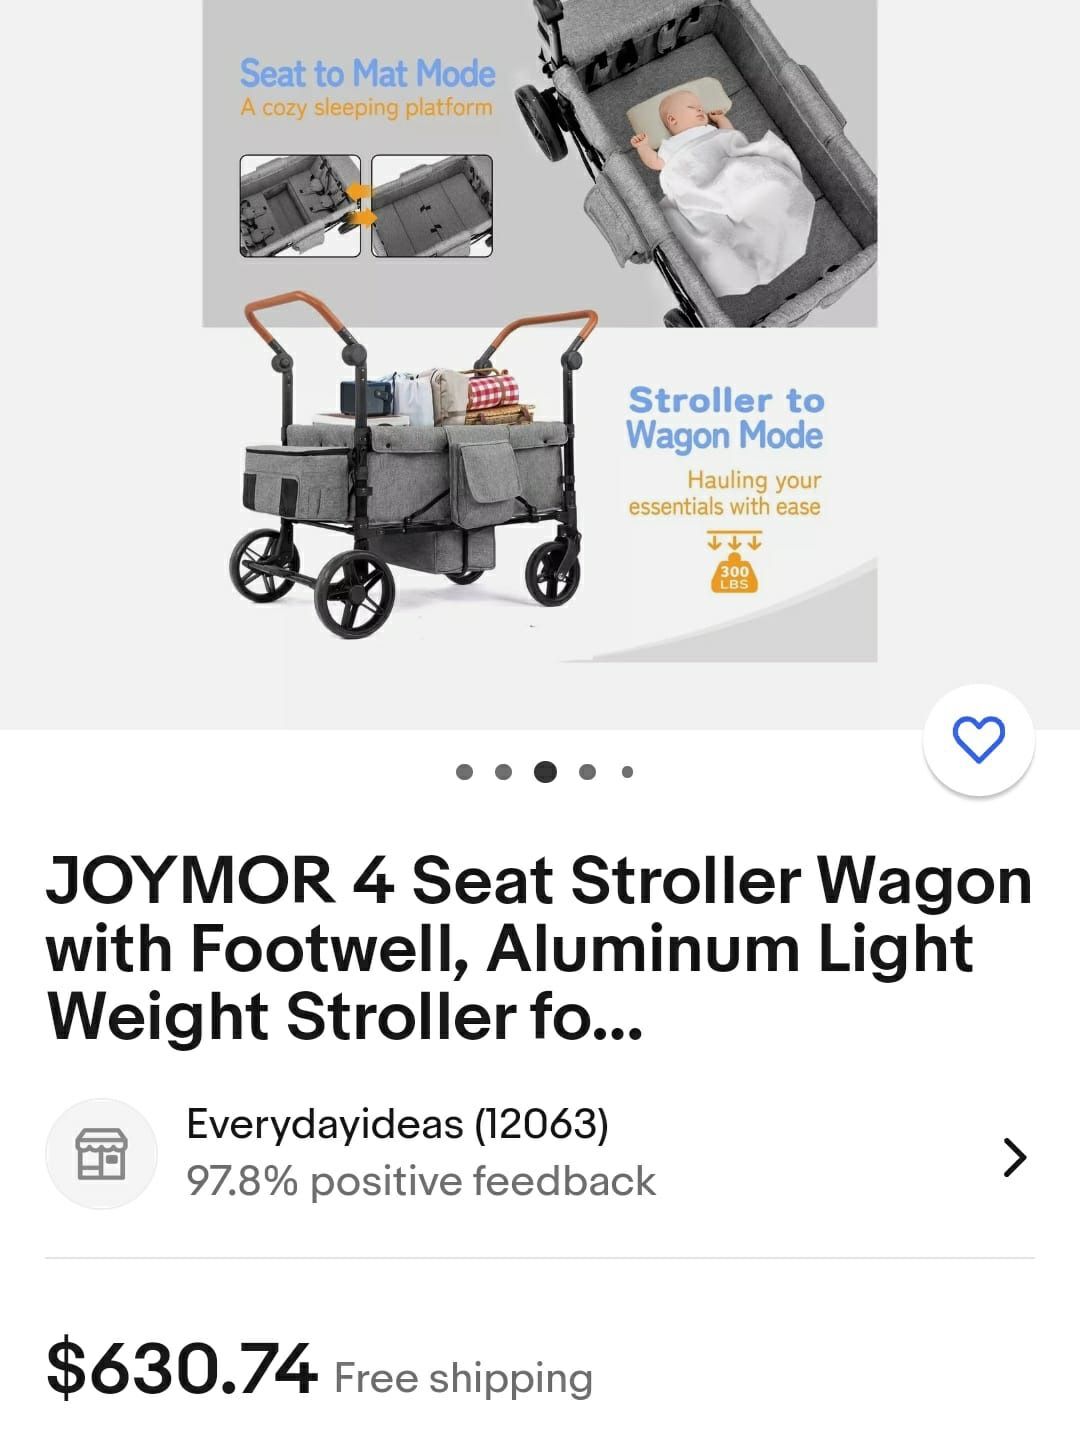 JOYMOR 4 Seat Stroller Wagon with Footwell, Aluminum Light Weight Stroller for Kids Infants, Adjustable Canopy, XL All-Terrain Wheel, Easy Push and Pu